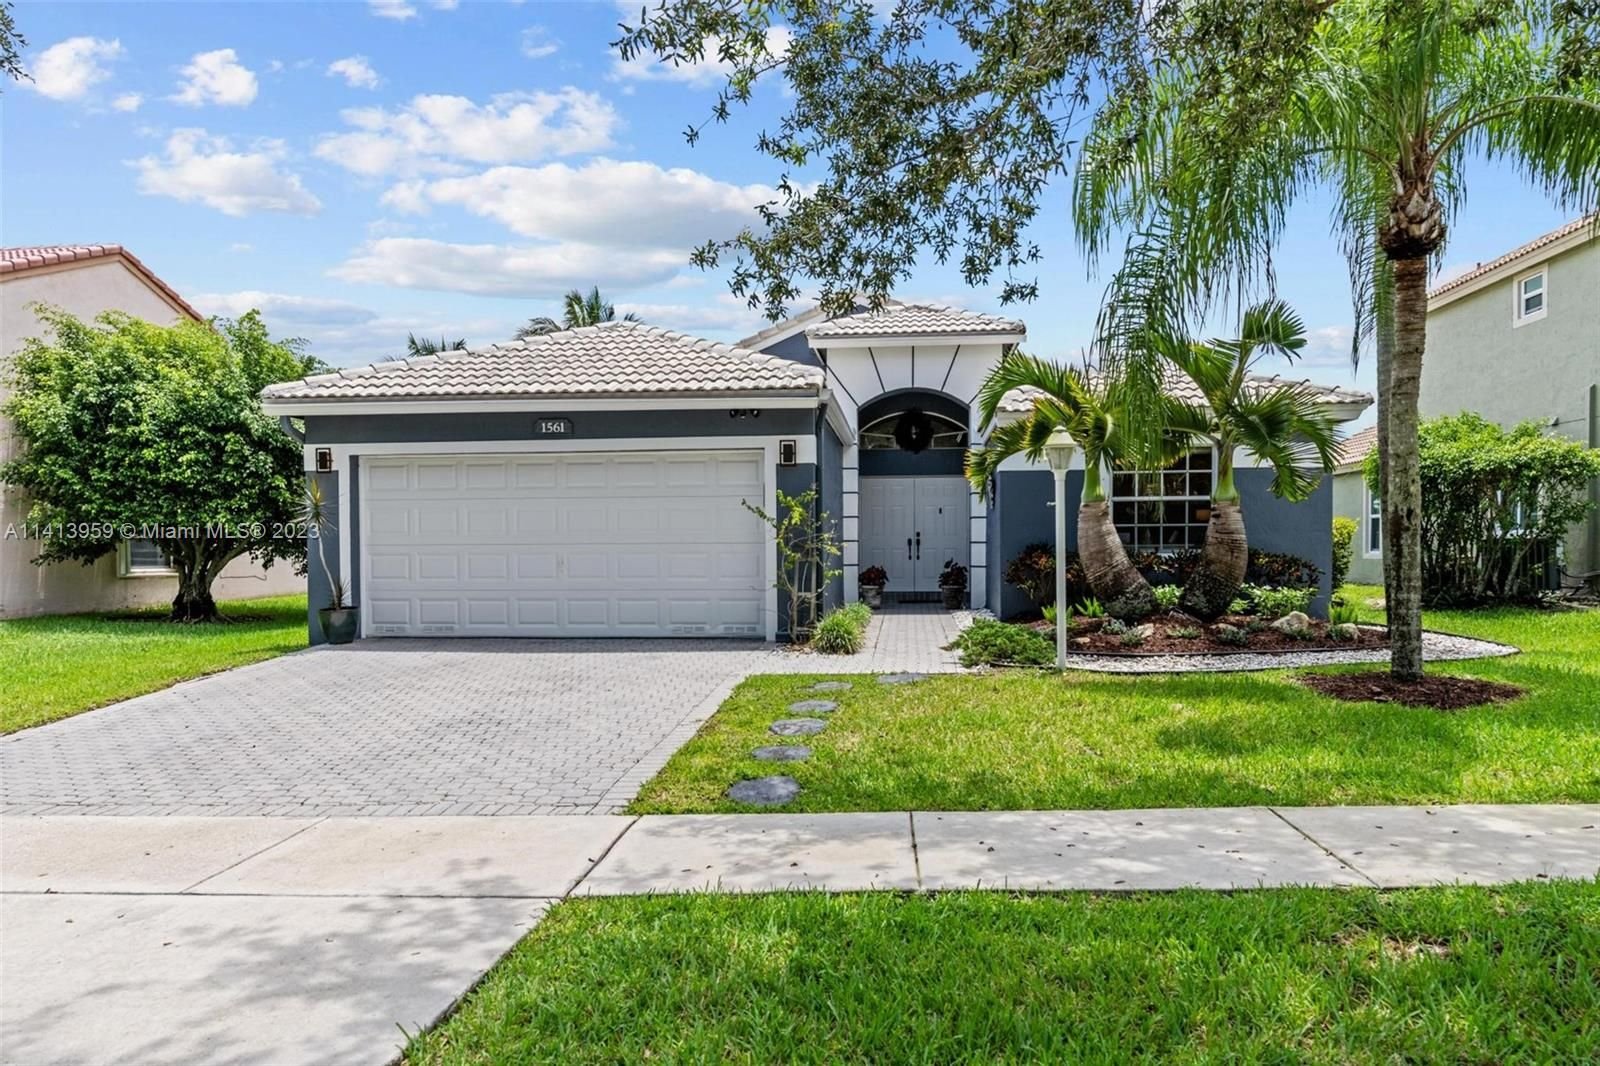 Real estate property located at 1561 132nd Ave, Broward County, Pembroke Pines, FL